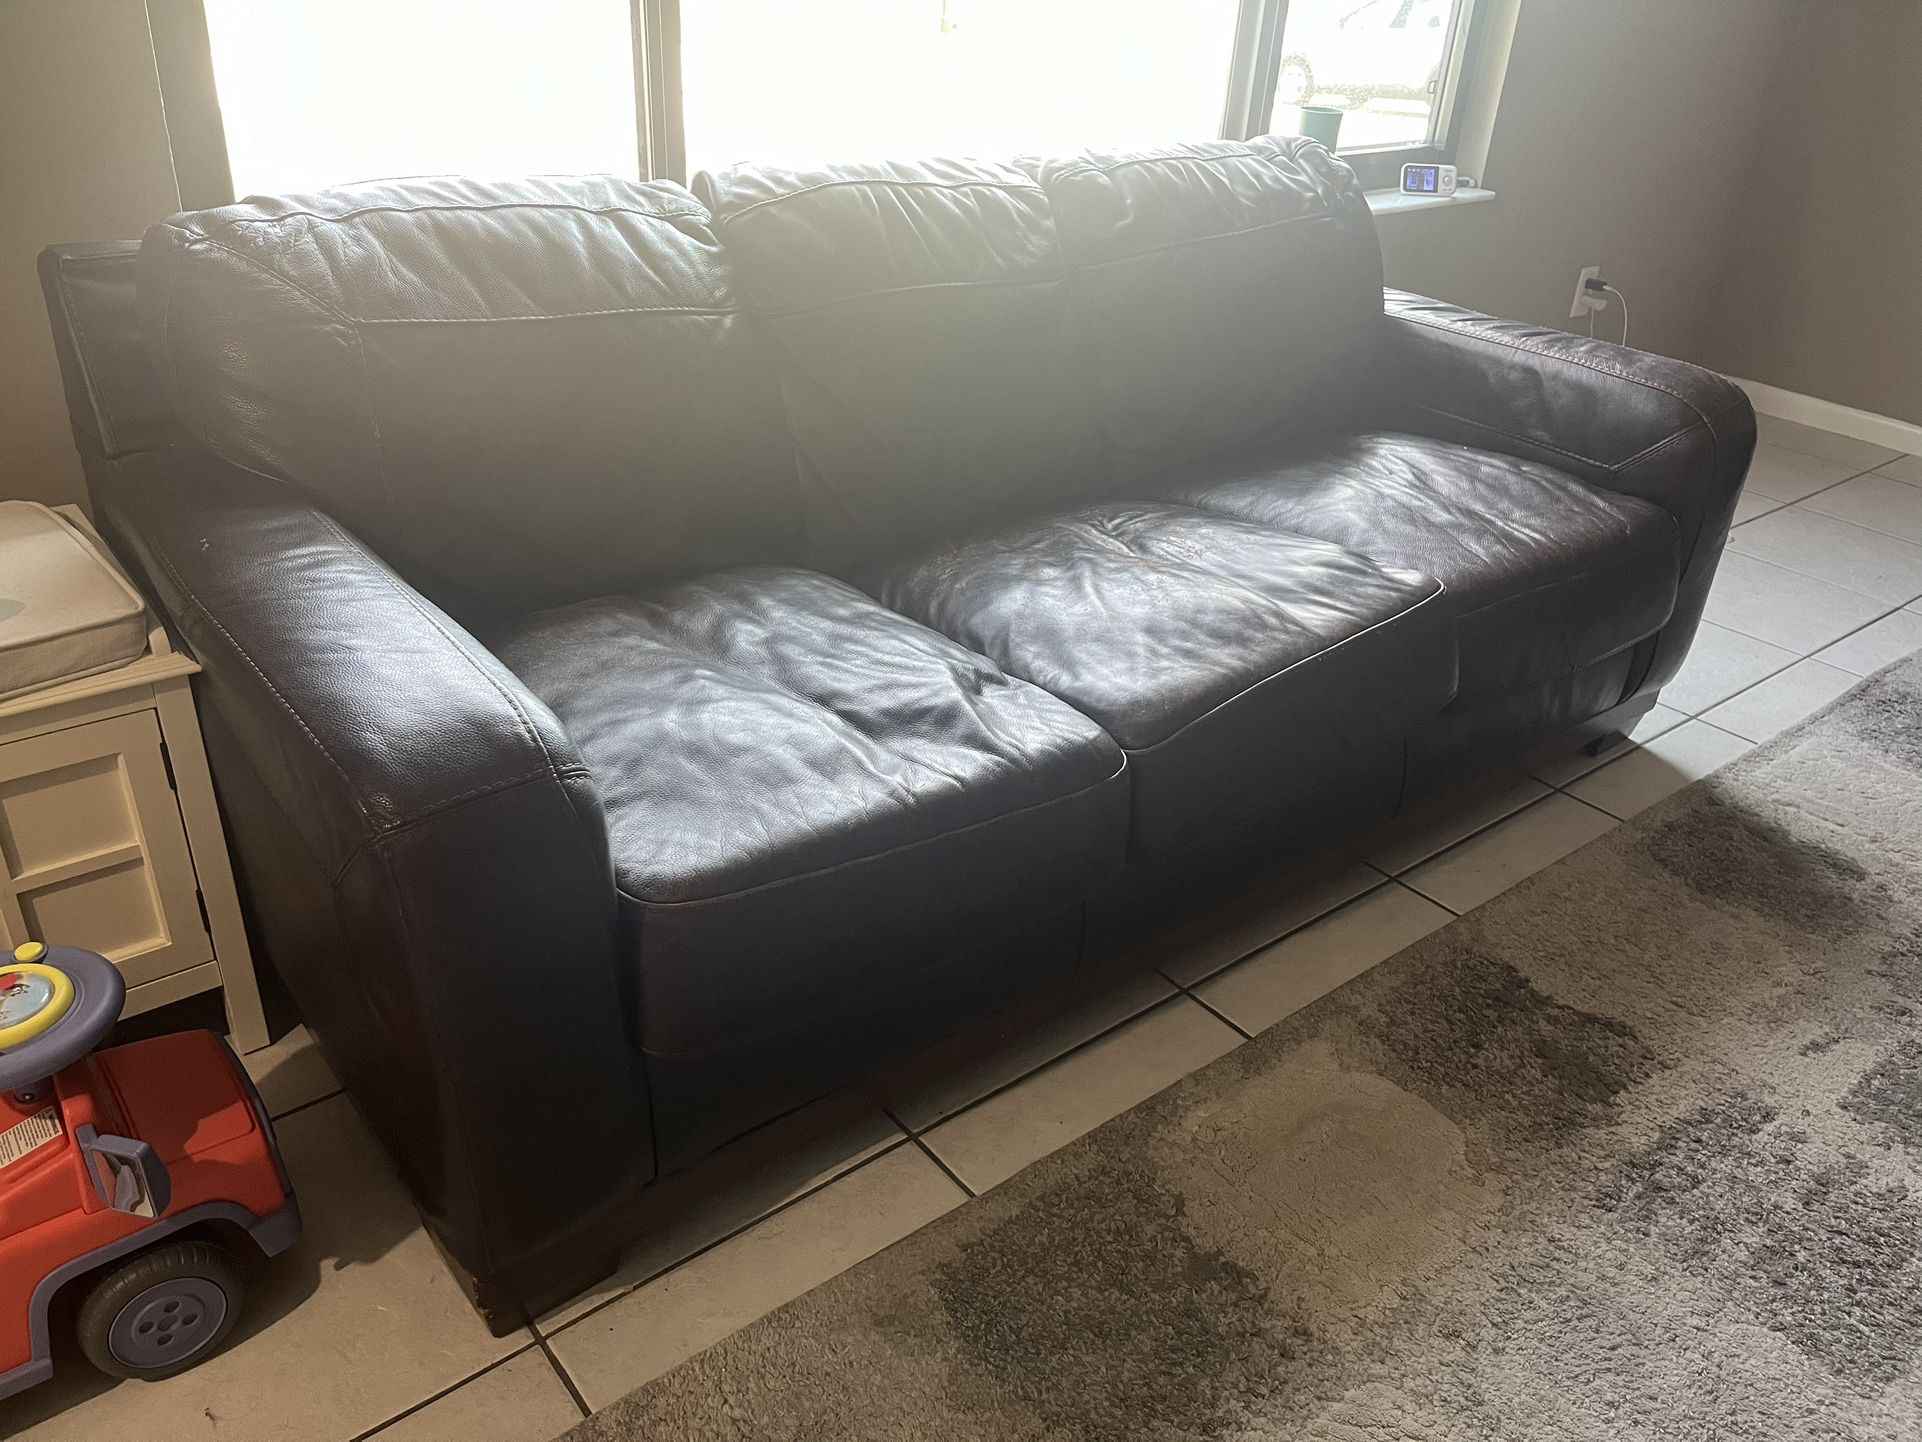 Leather Couch and chair